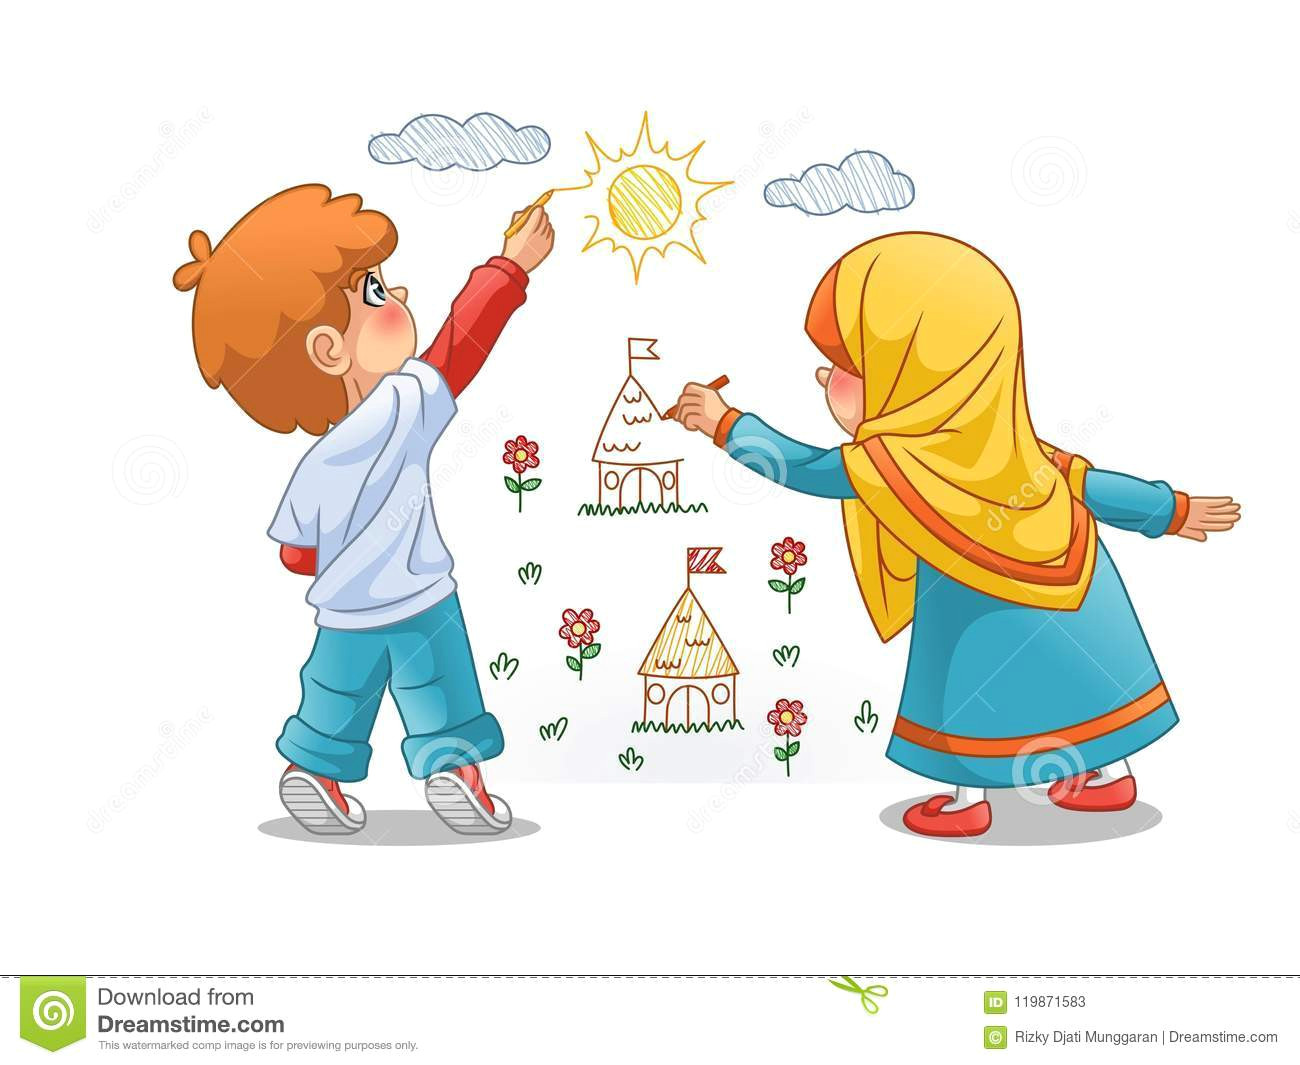 Drawing Cartoons On Illustrator Muslim Girls and Boy Draw Landscapes On the Walls Stock Vector